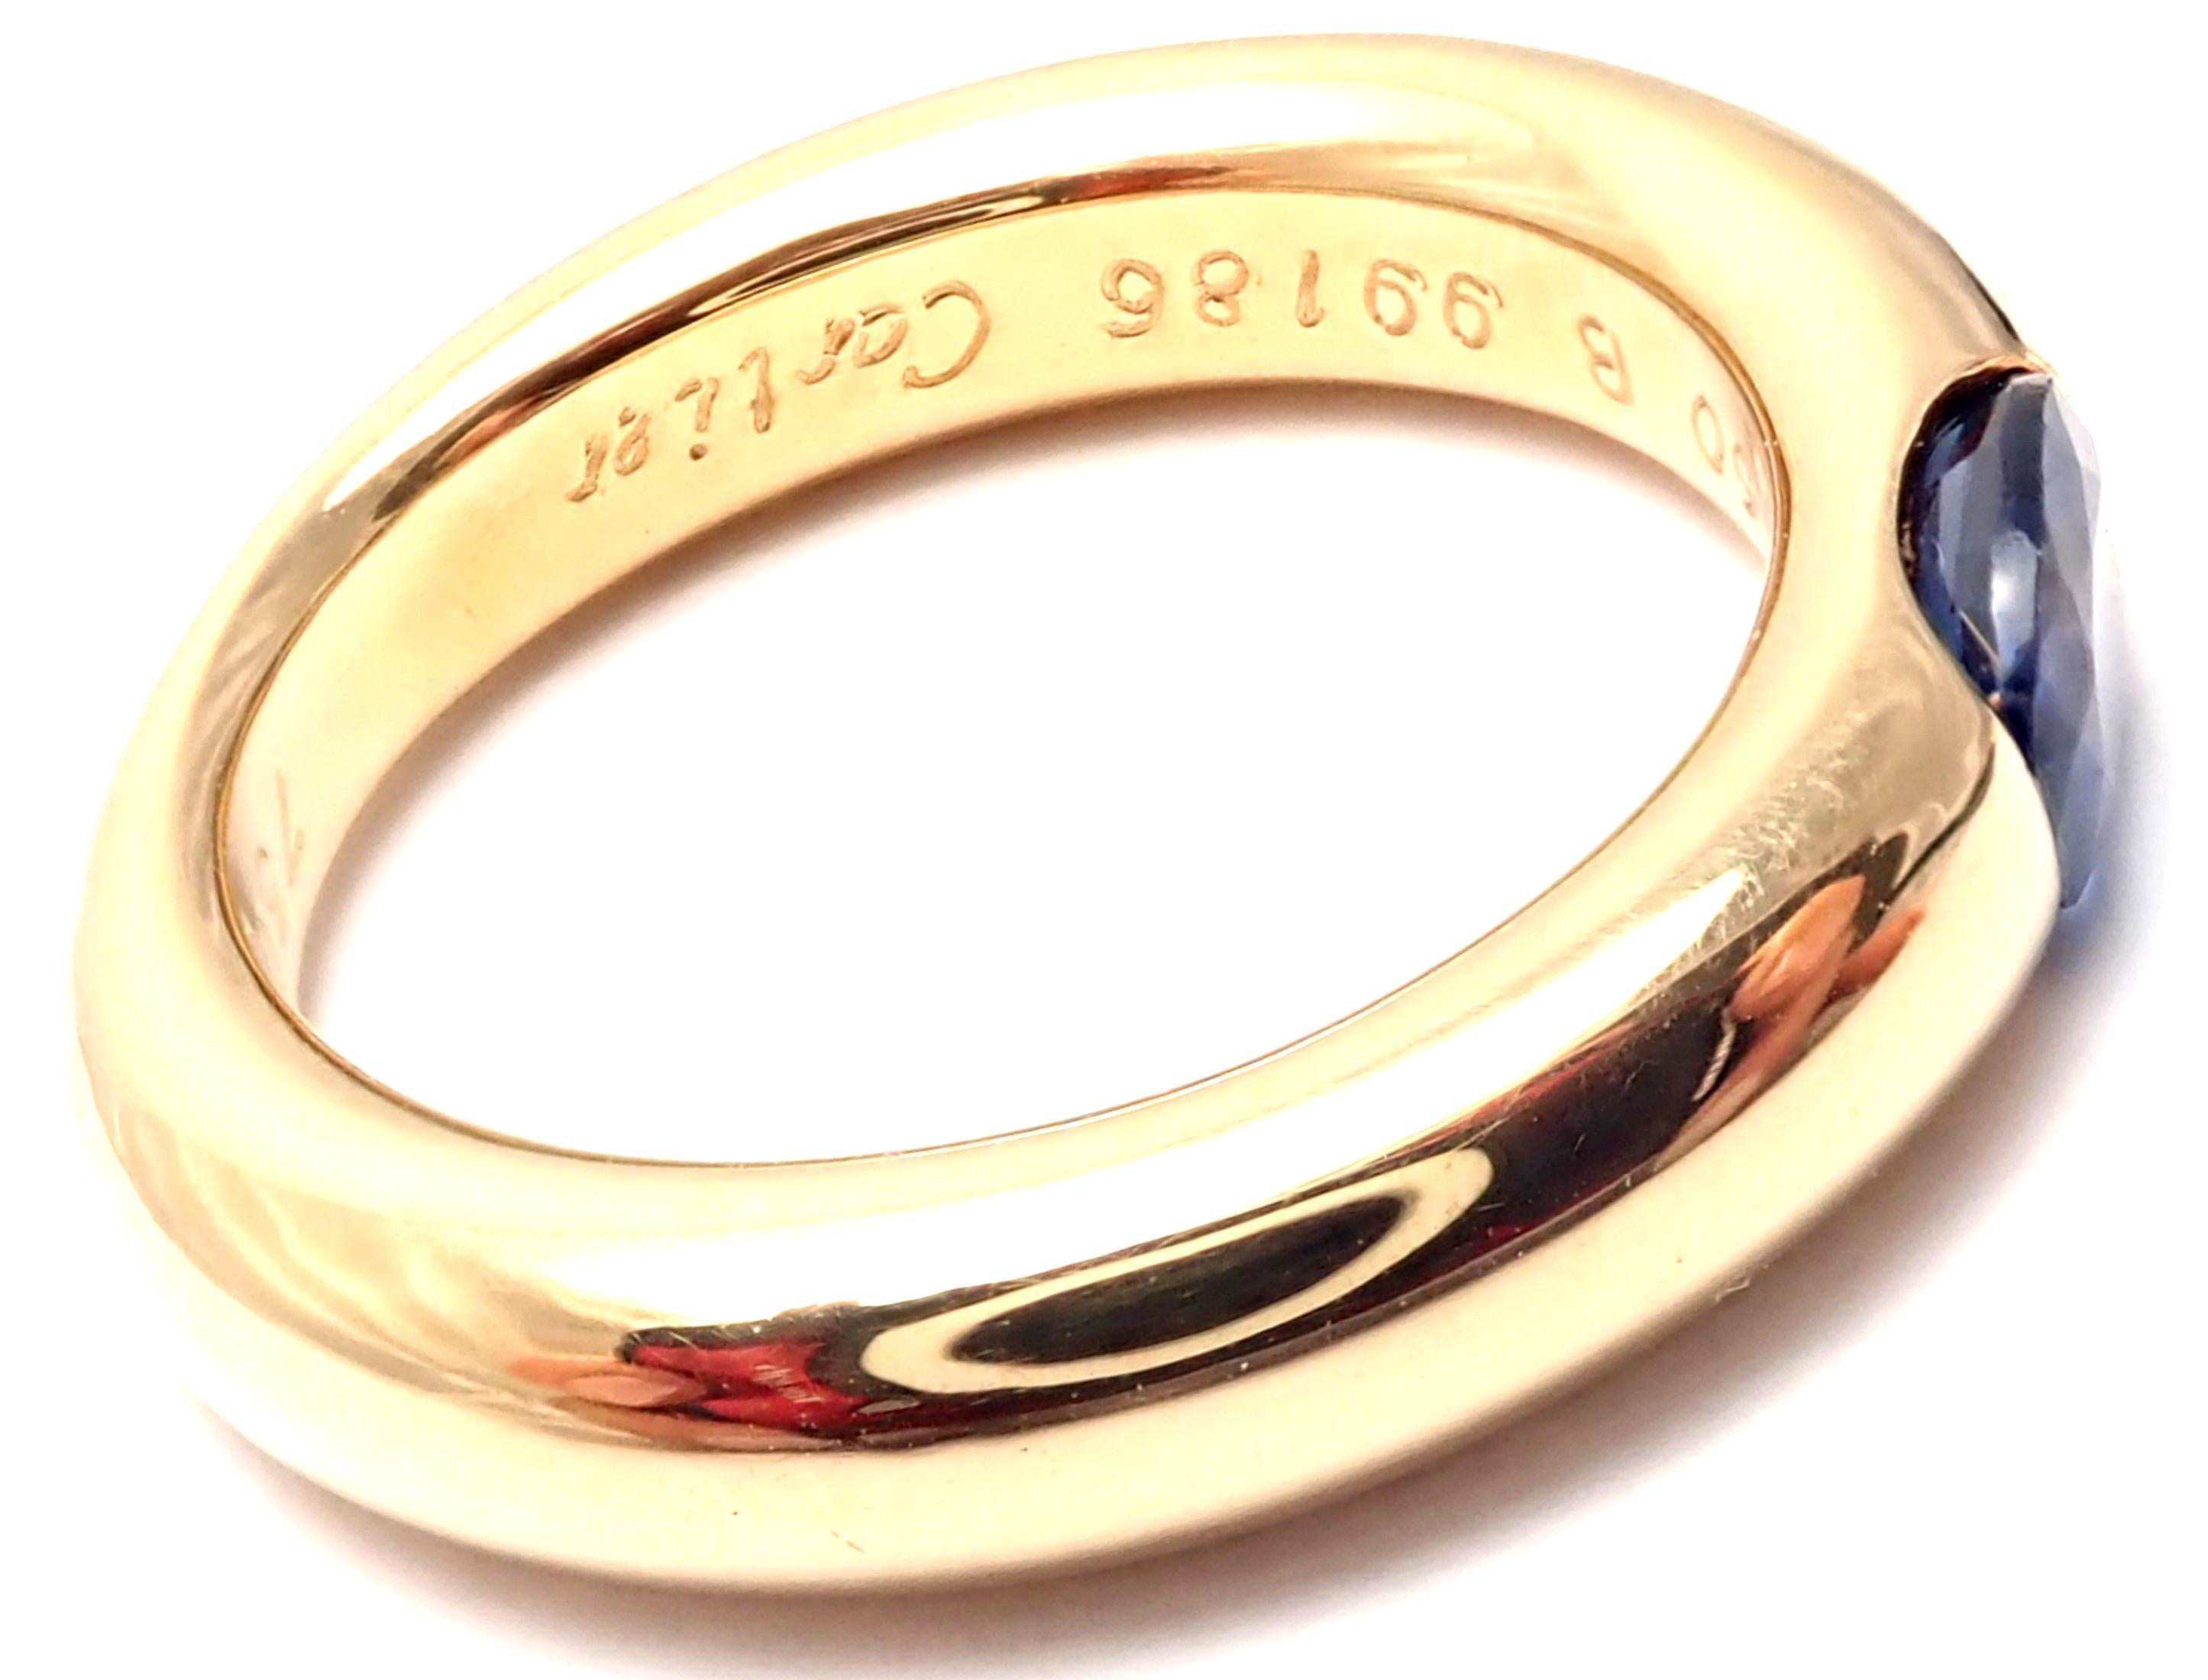 18k Yellow Gold Ellipse Sapphire Band Ring by Cartier.
With 1 oval-shaped beautiful sapphire 5mm x 4mm.
Details:
Width: 4mm
Weight: 8.8 grams
Ring Size: European 50, US 5 1/4
Stamped Hallmarks: Cartier 750 50 1992 99186
*Free Shipping within the